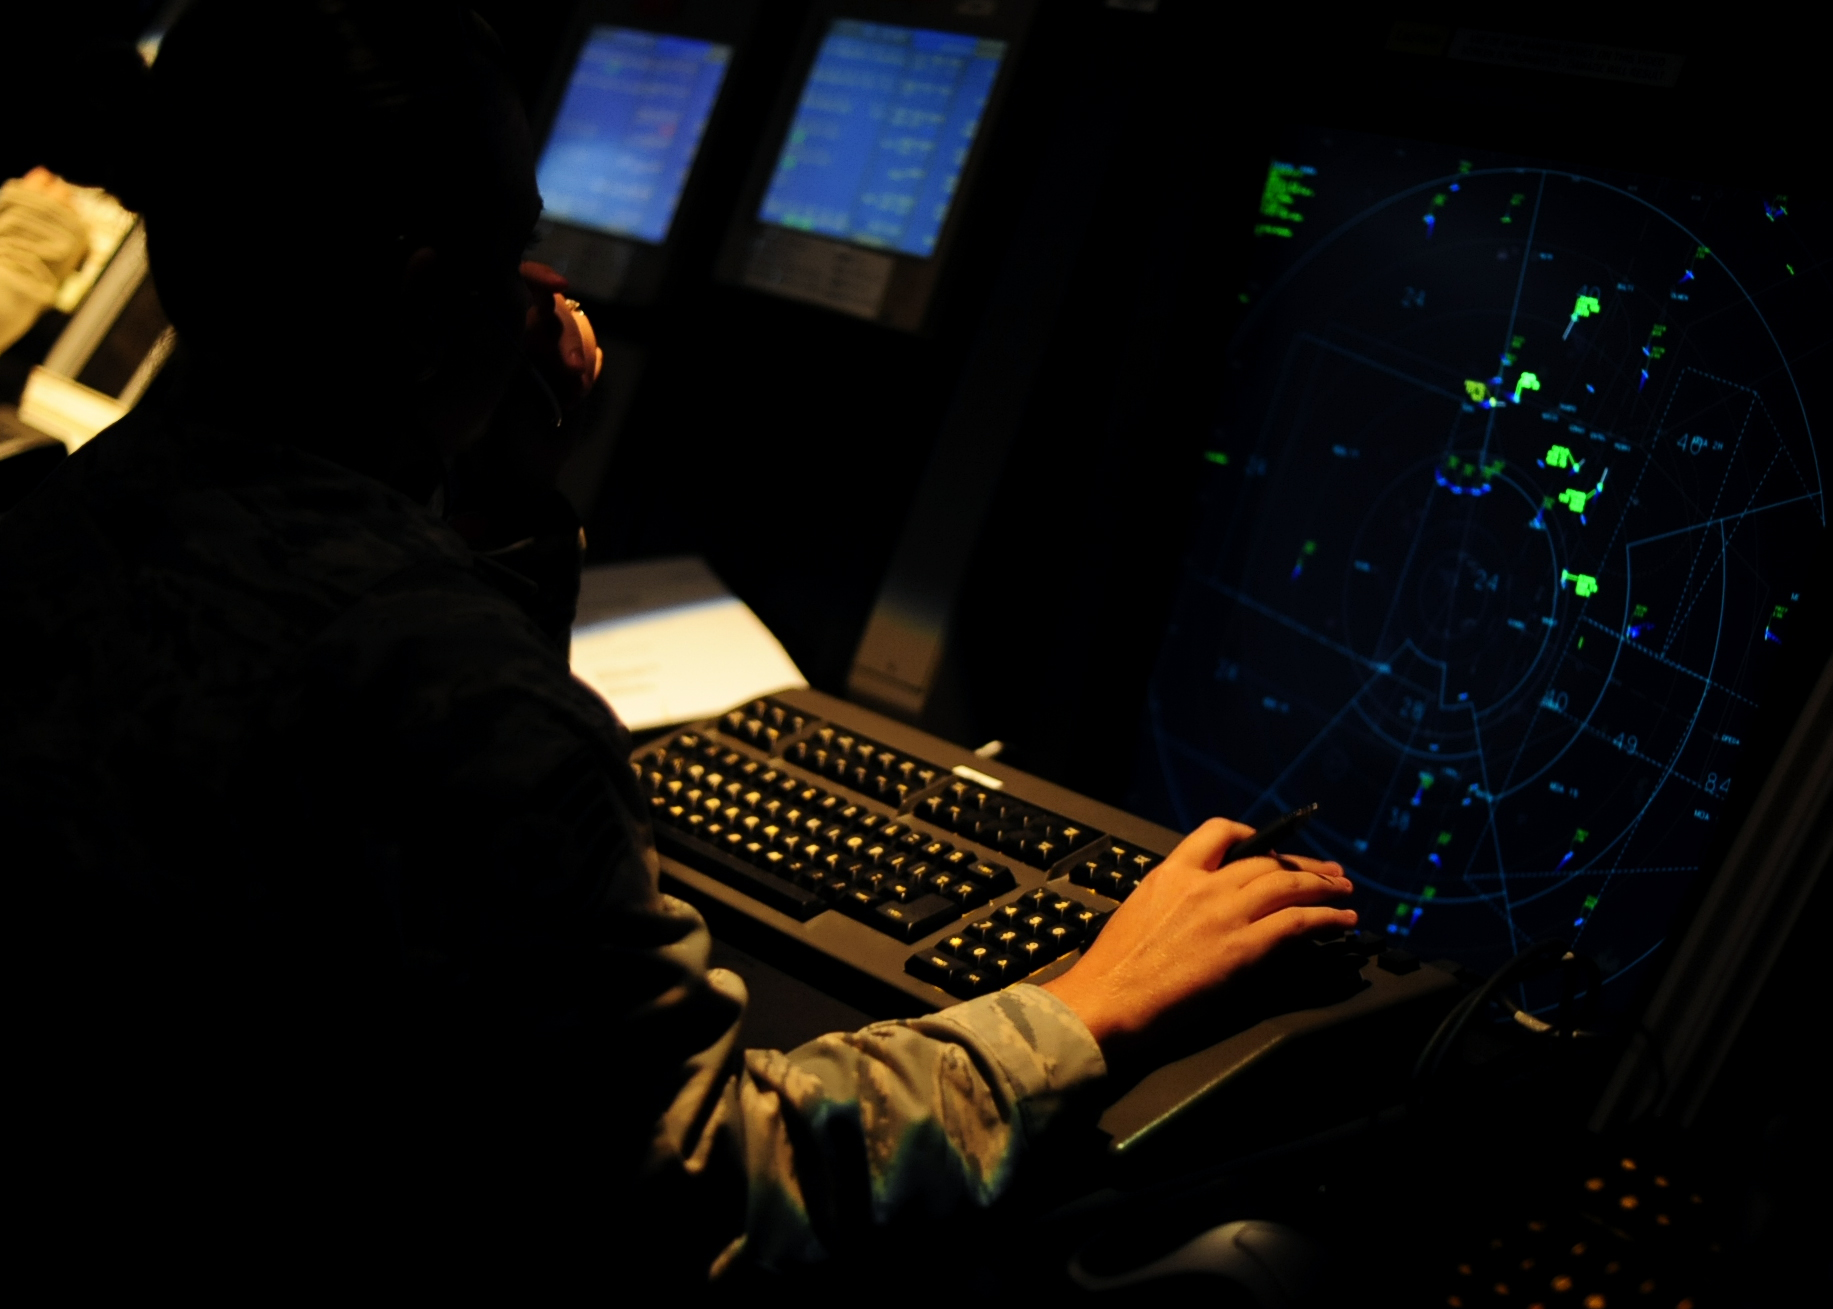 8th Fighter Wing Radar Approach Control Cave Trolls Ensure Safe, Efficient Air Traffic Flow > U.S. Indo Pacific Command > 2015